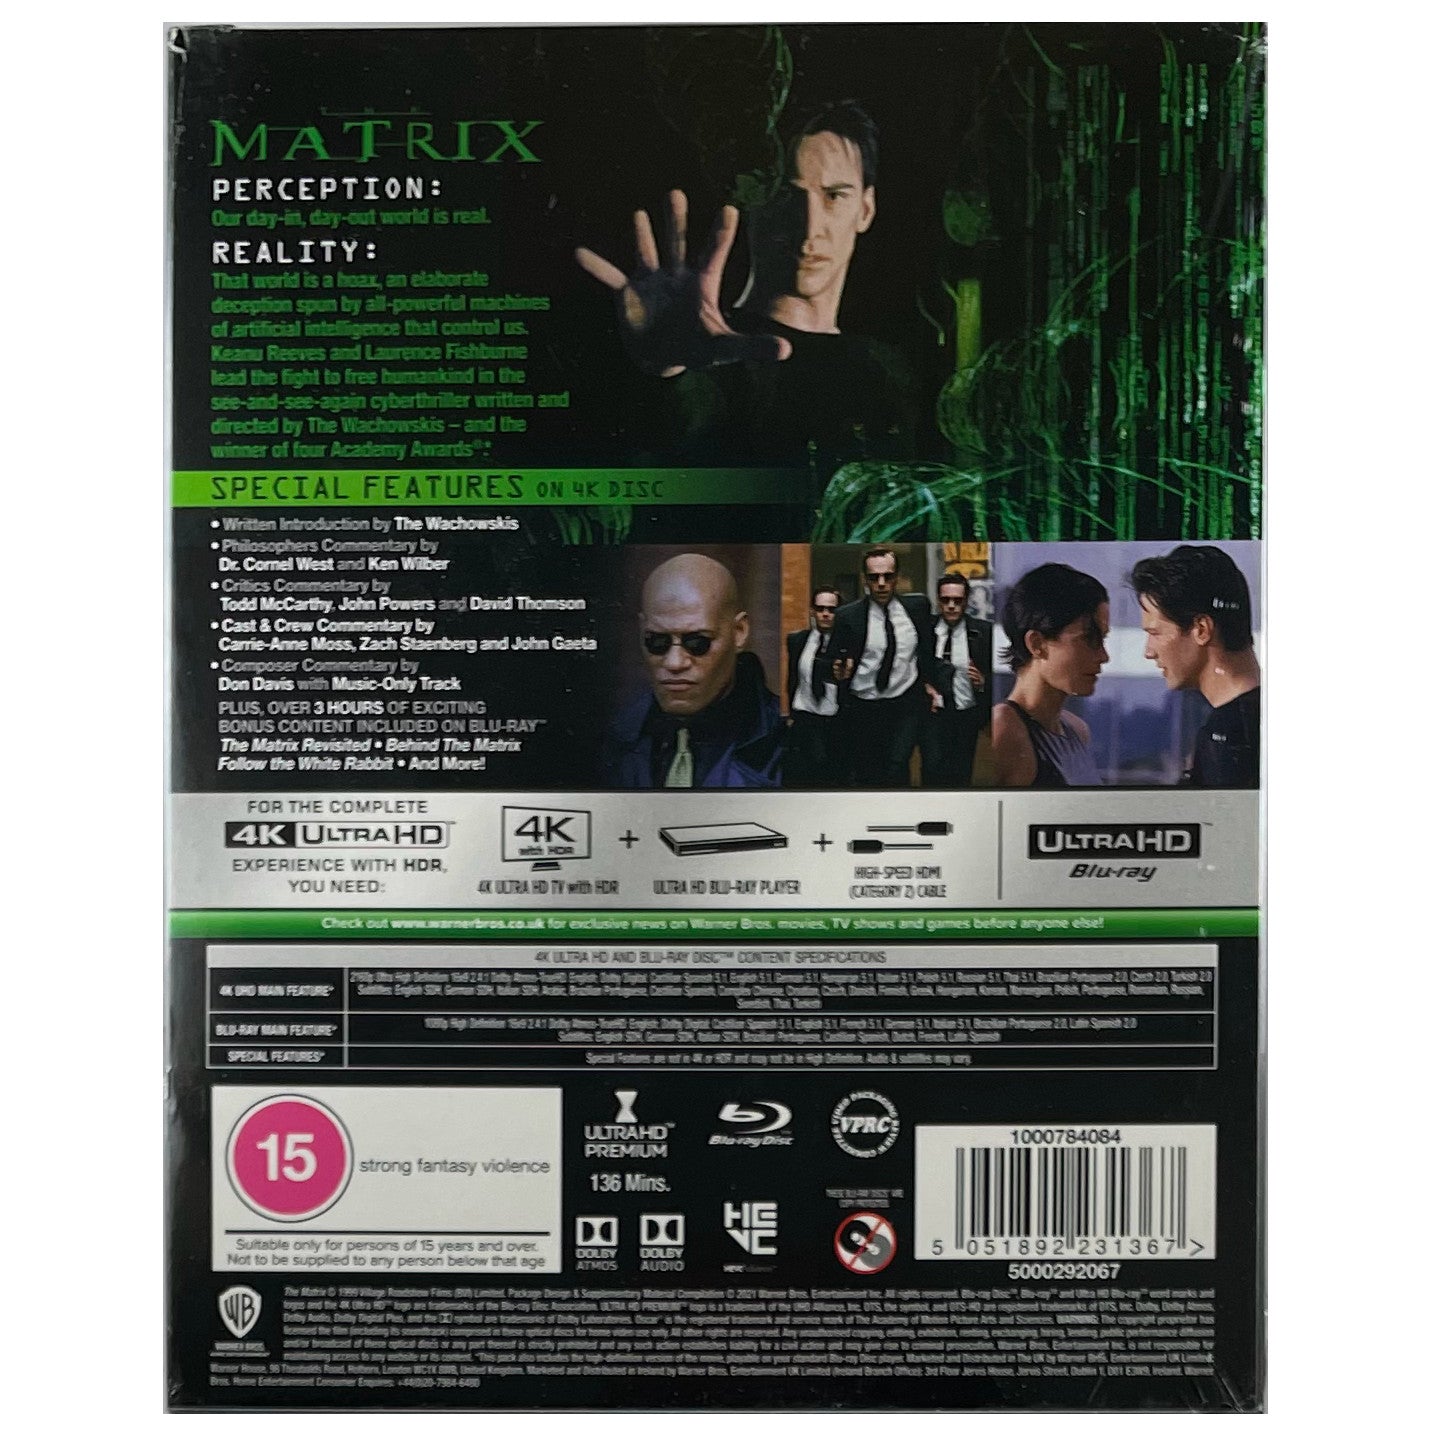 The Matrix 4K Steelbook - Titans of Cult Release **Ripped Shrinkwrap, Slightly Scuffed Slip Cover**